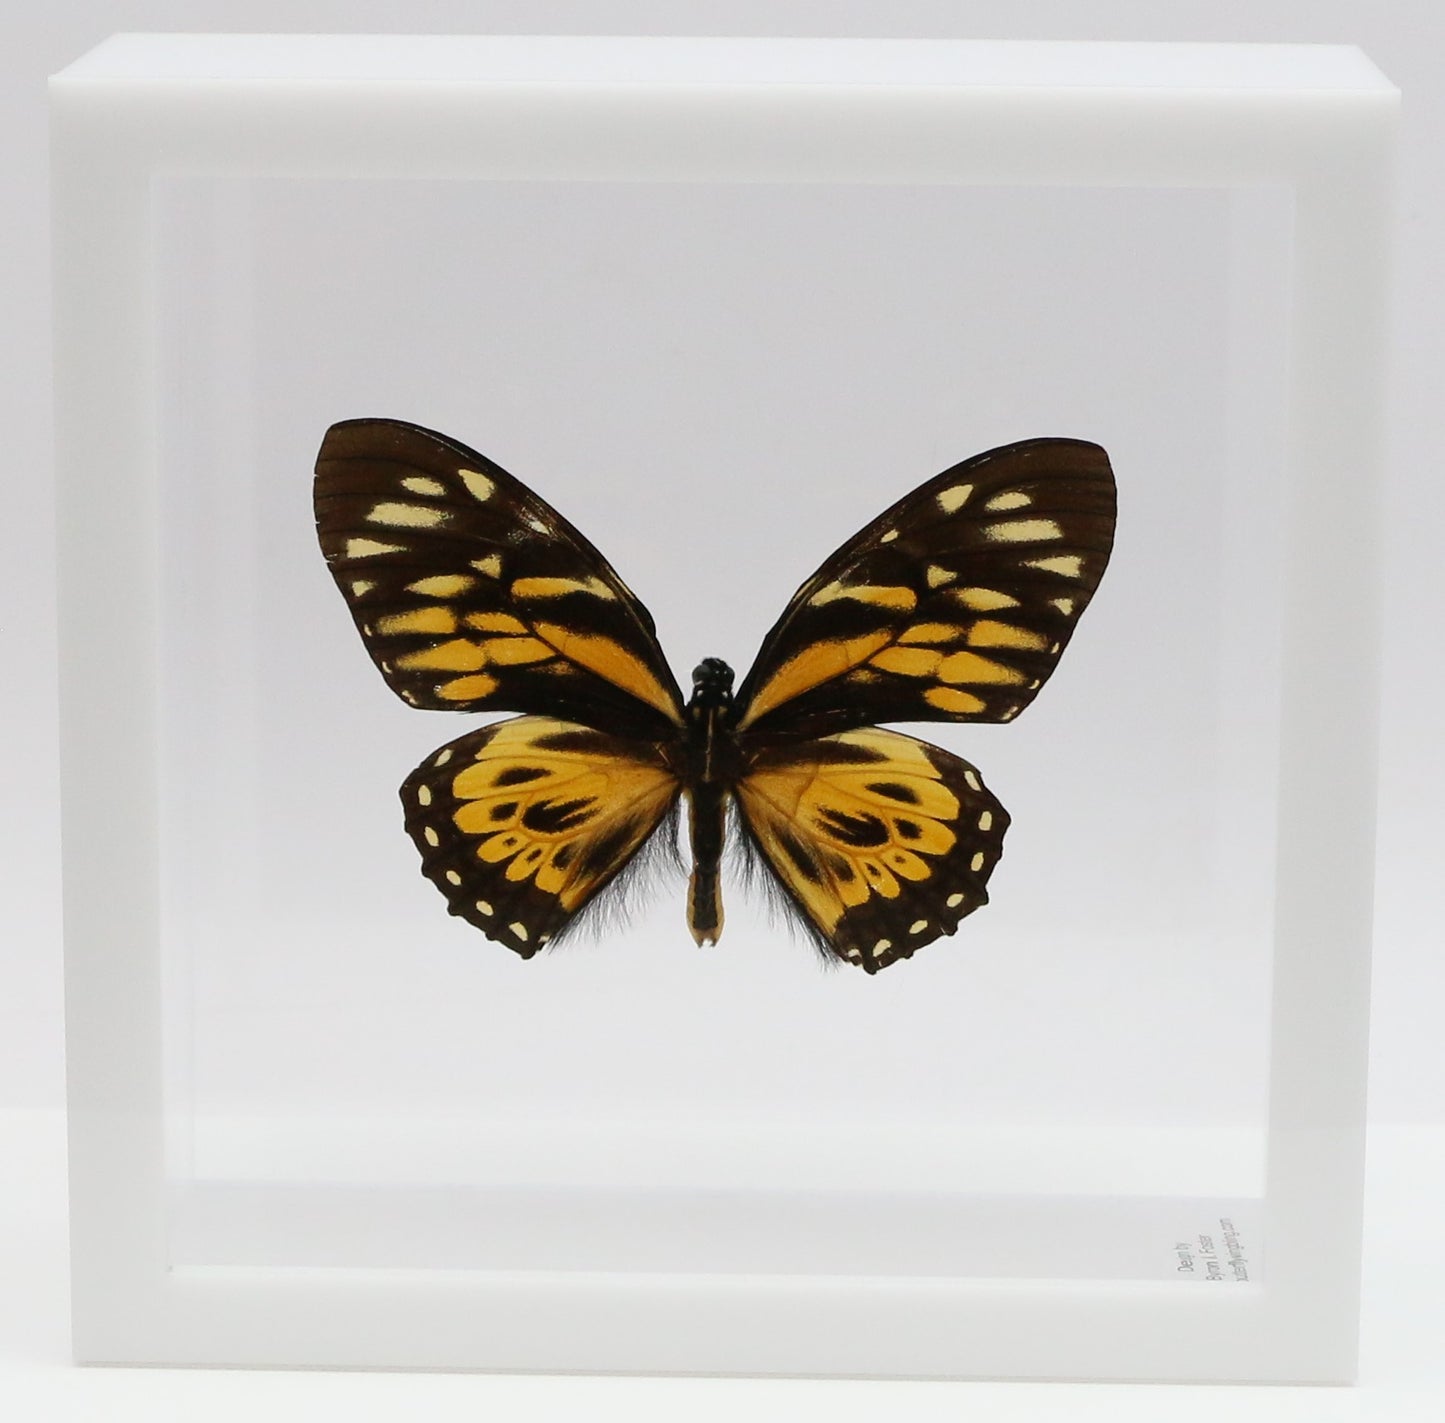 9060612 - Real Butterfly Acrylic Display Box - 6" X 6" - Giant Tiger Butterfly (Papilio zagreus)